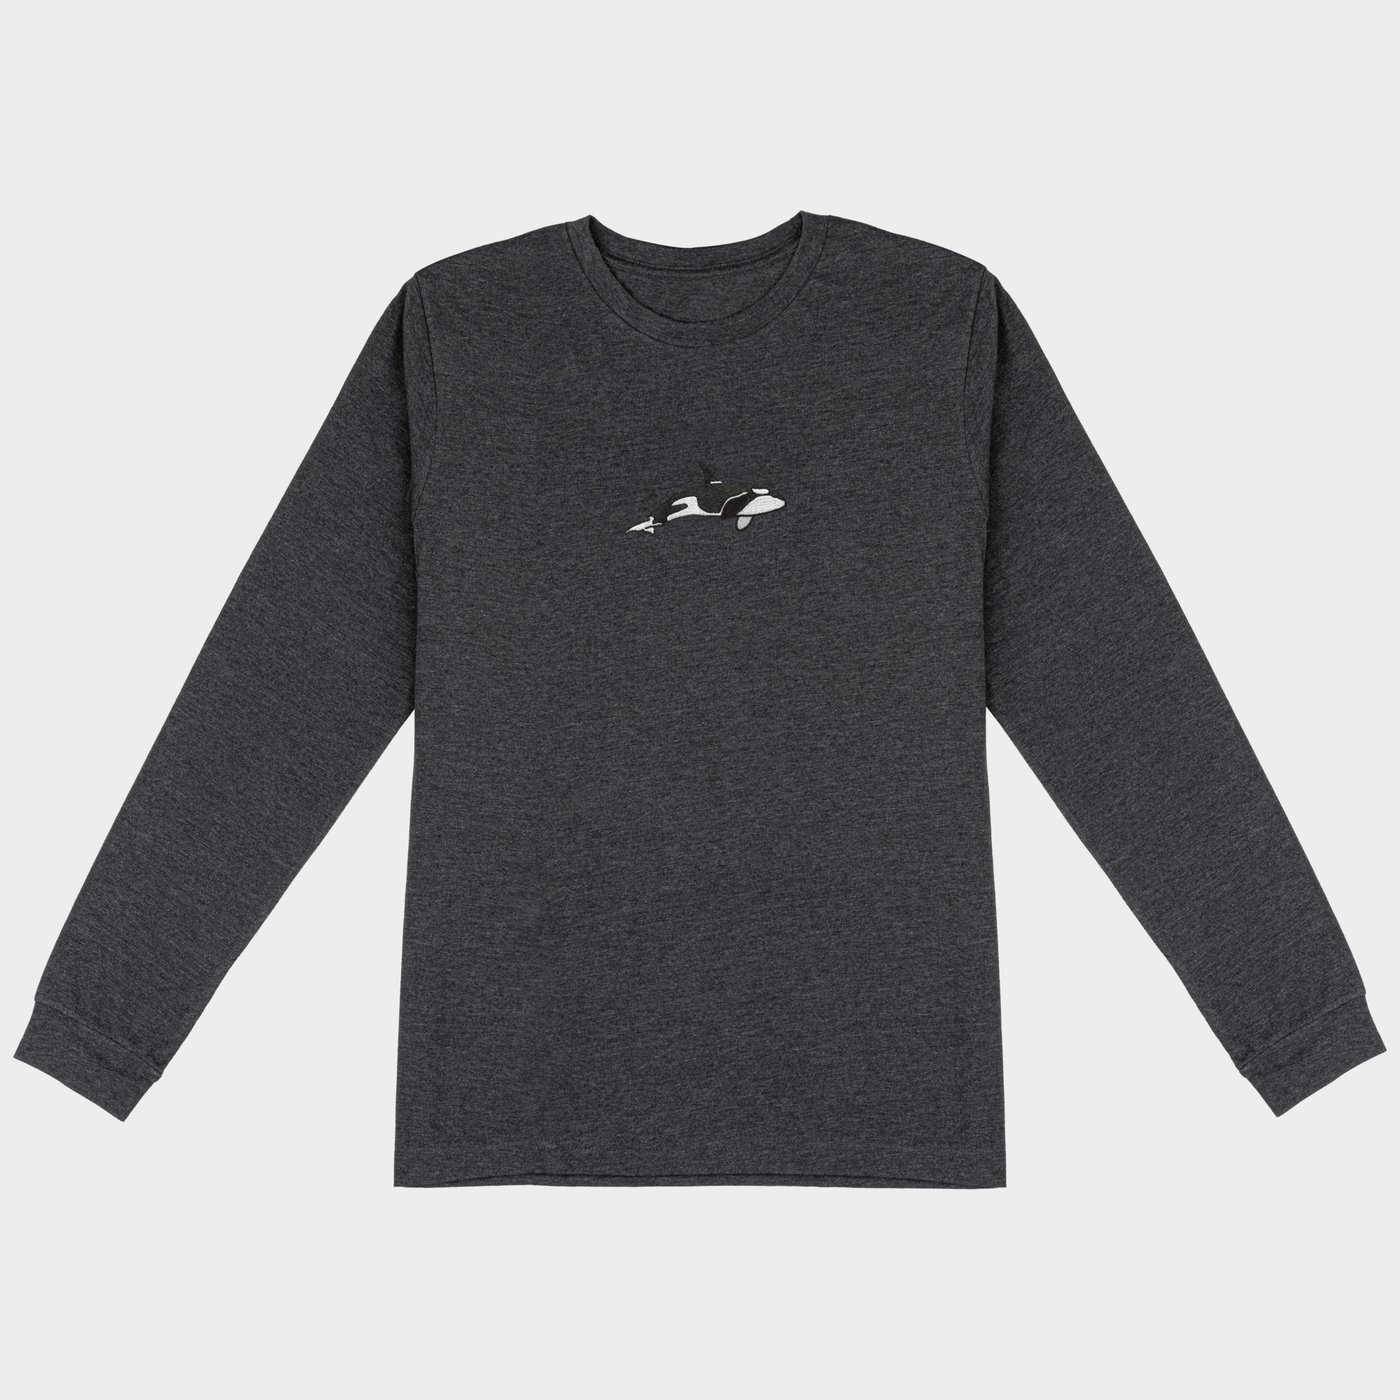 Bobby's Planet Men's Embroidered Orca Long Sleeve Shirt from Seven Seas Fish Animals Collection in Dark Grey Heather Color#color_dark-grey-heather